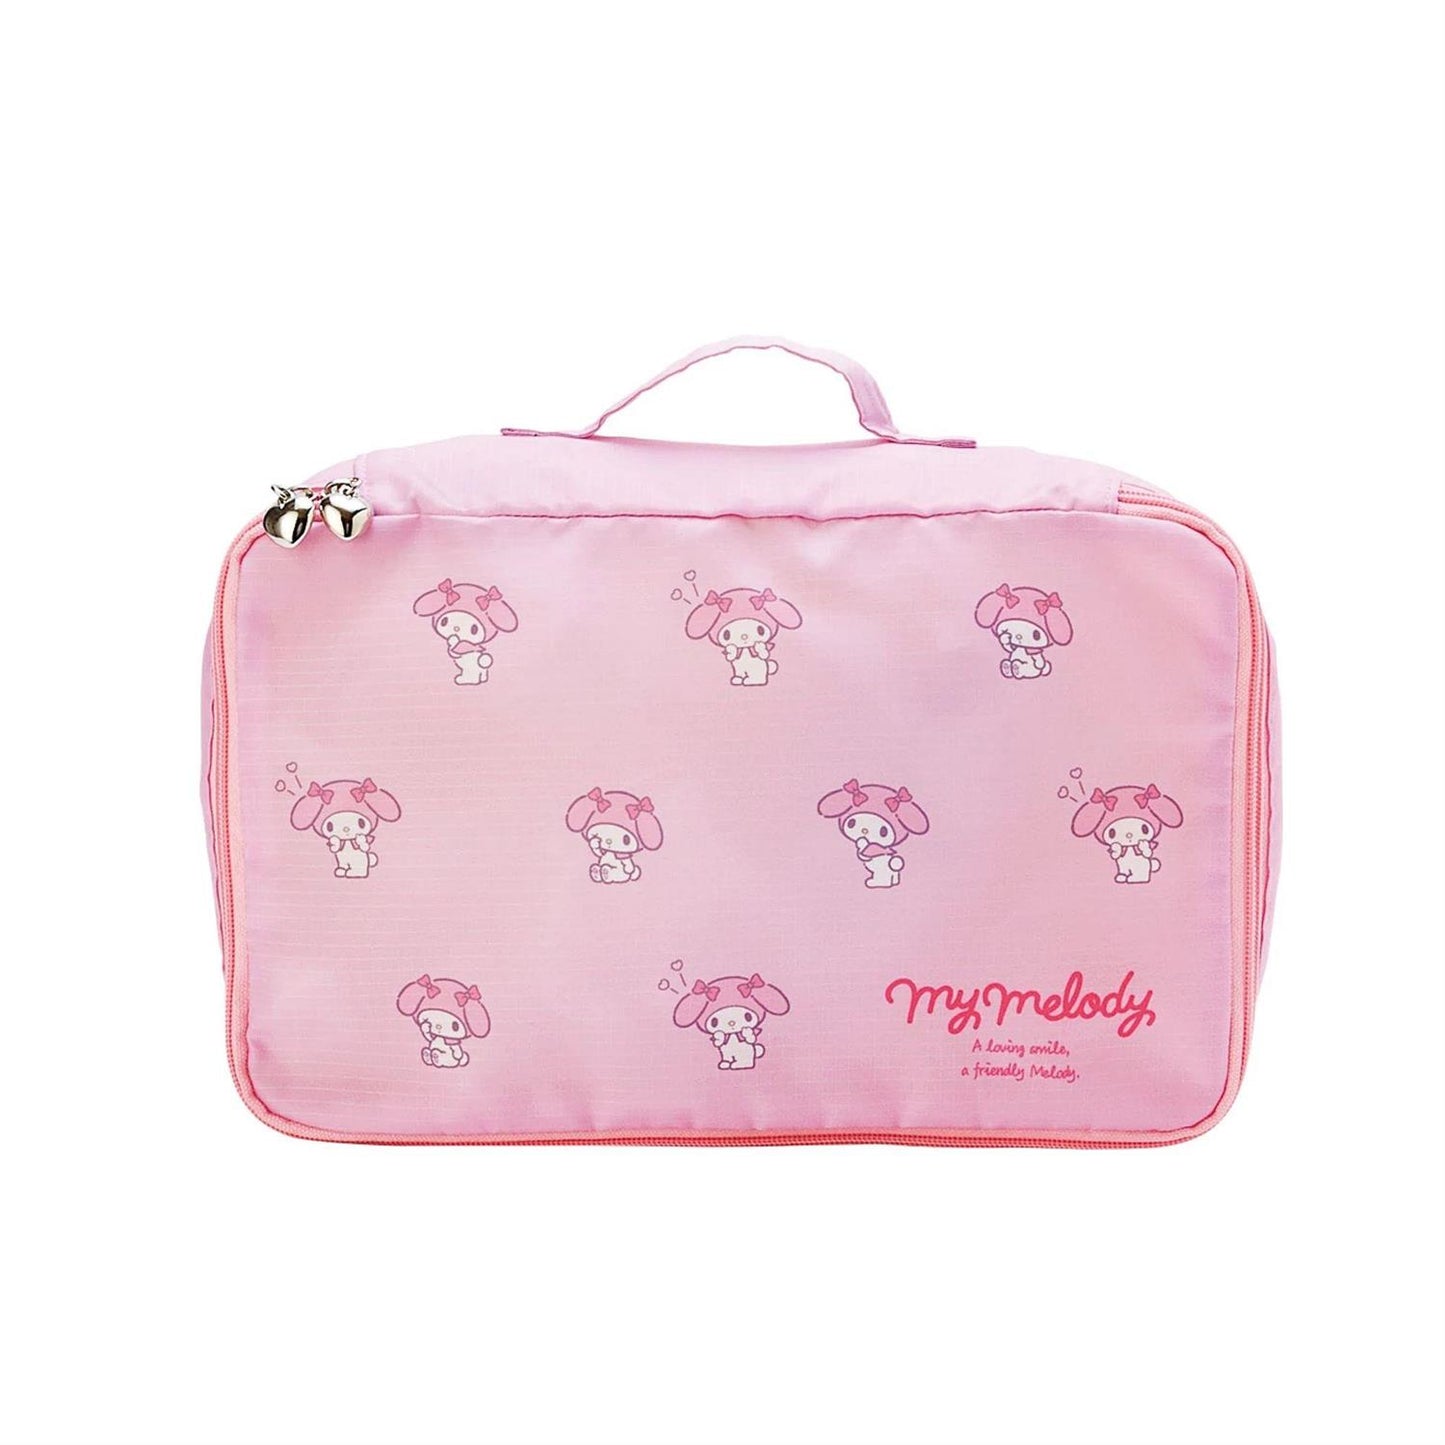 My Melody 3pc Travel Inner Cases Set